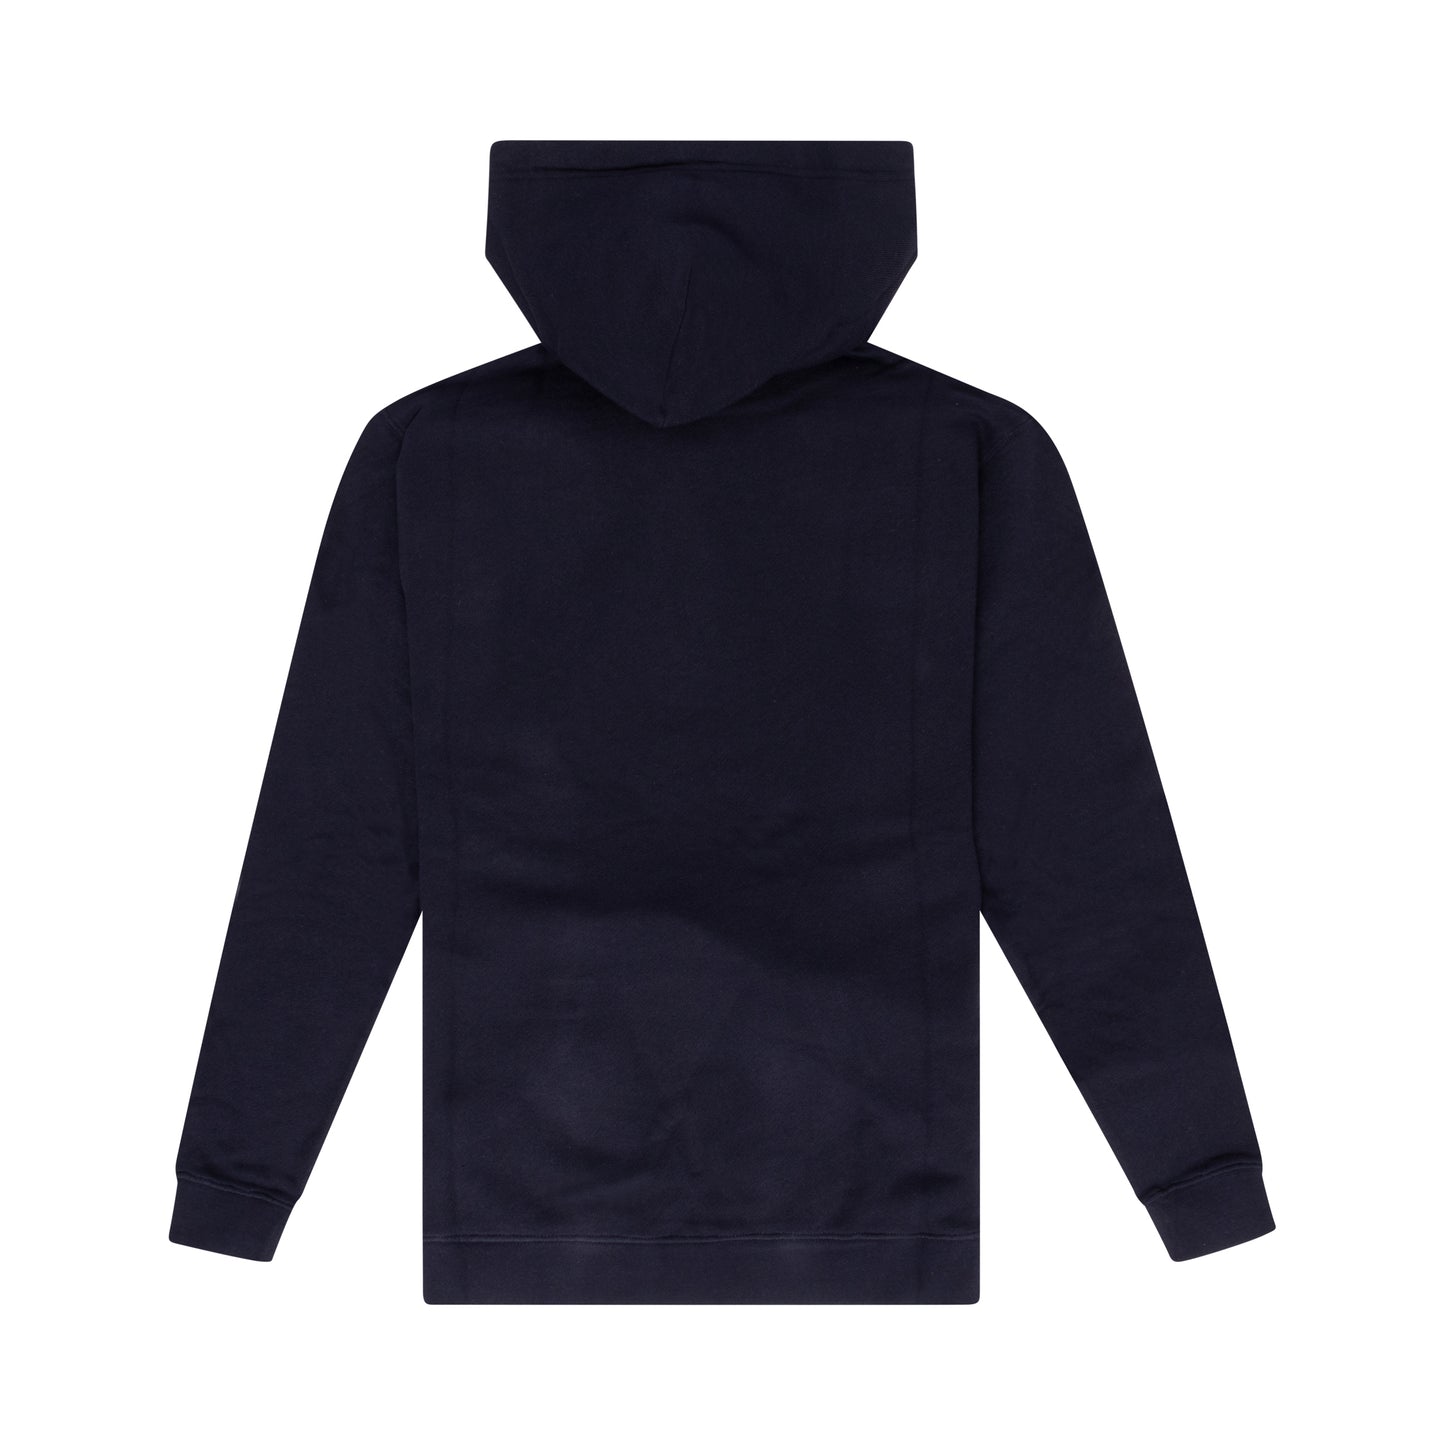 Anagram Embroidered Hoodie in Blue Navy